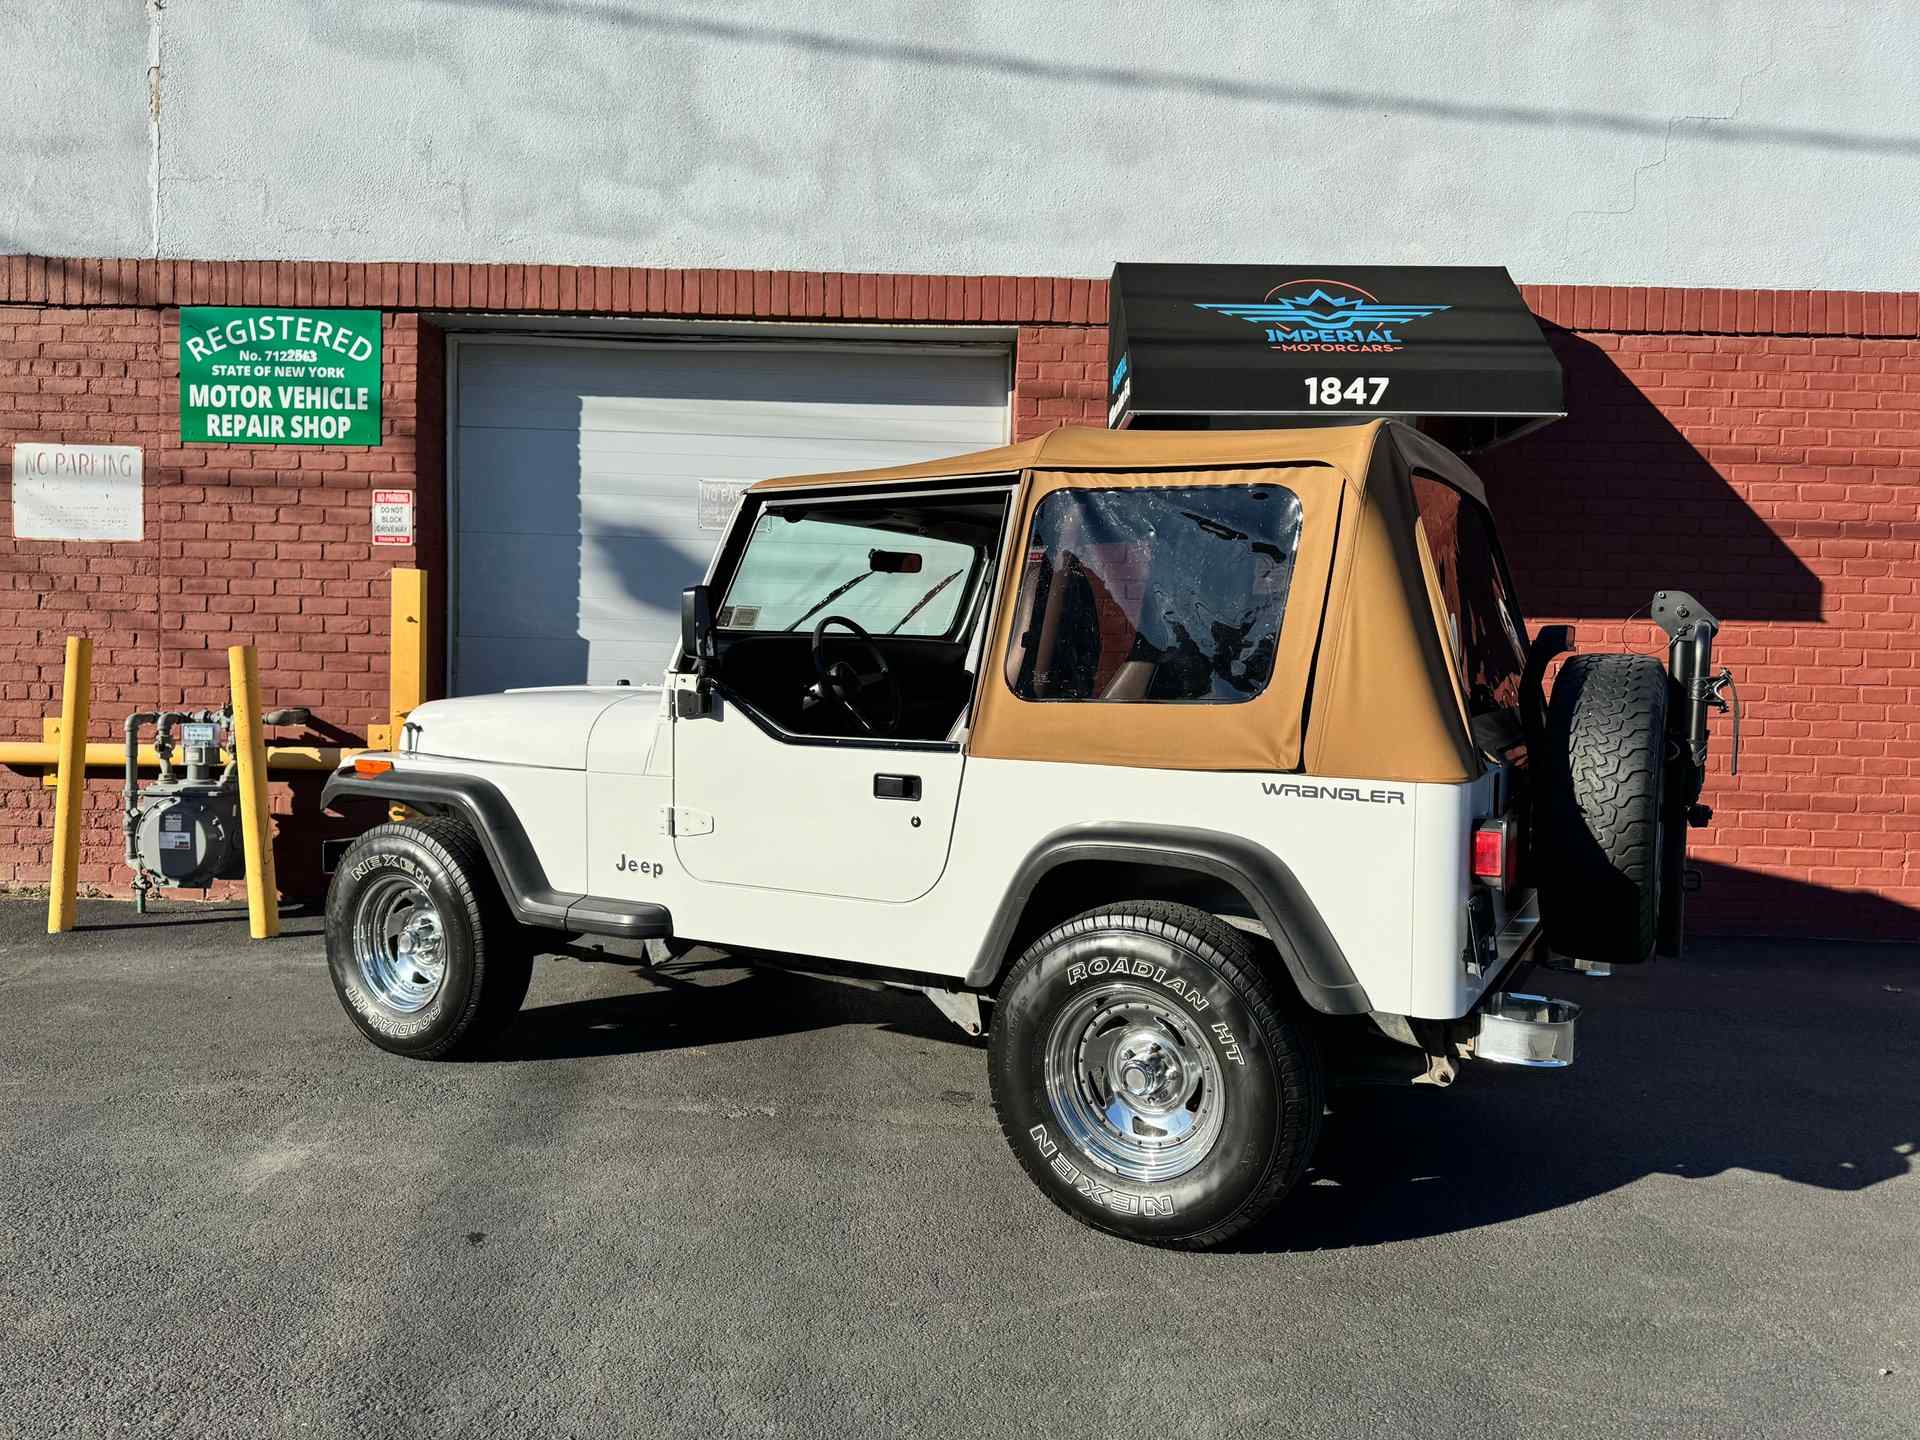 1995-jeep-wrangler-2dr-s-for-sale-03